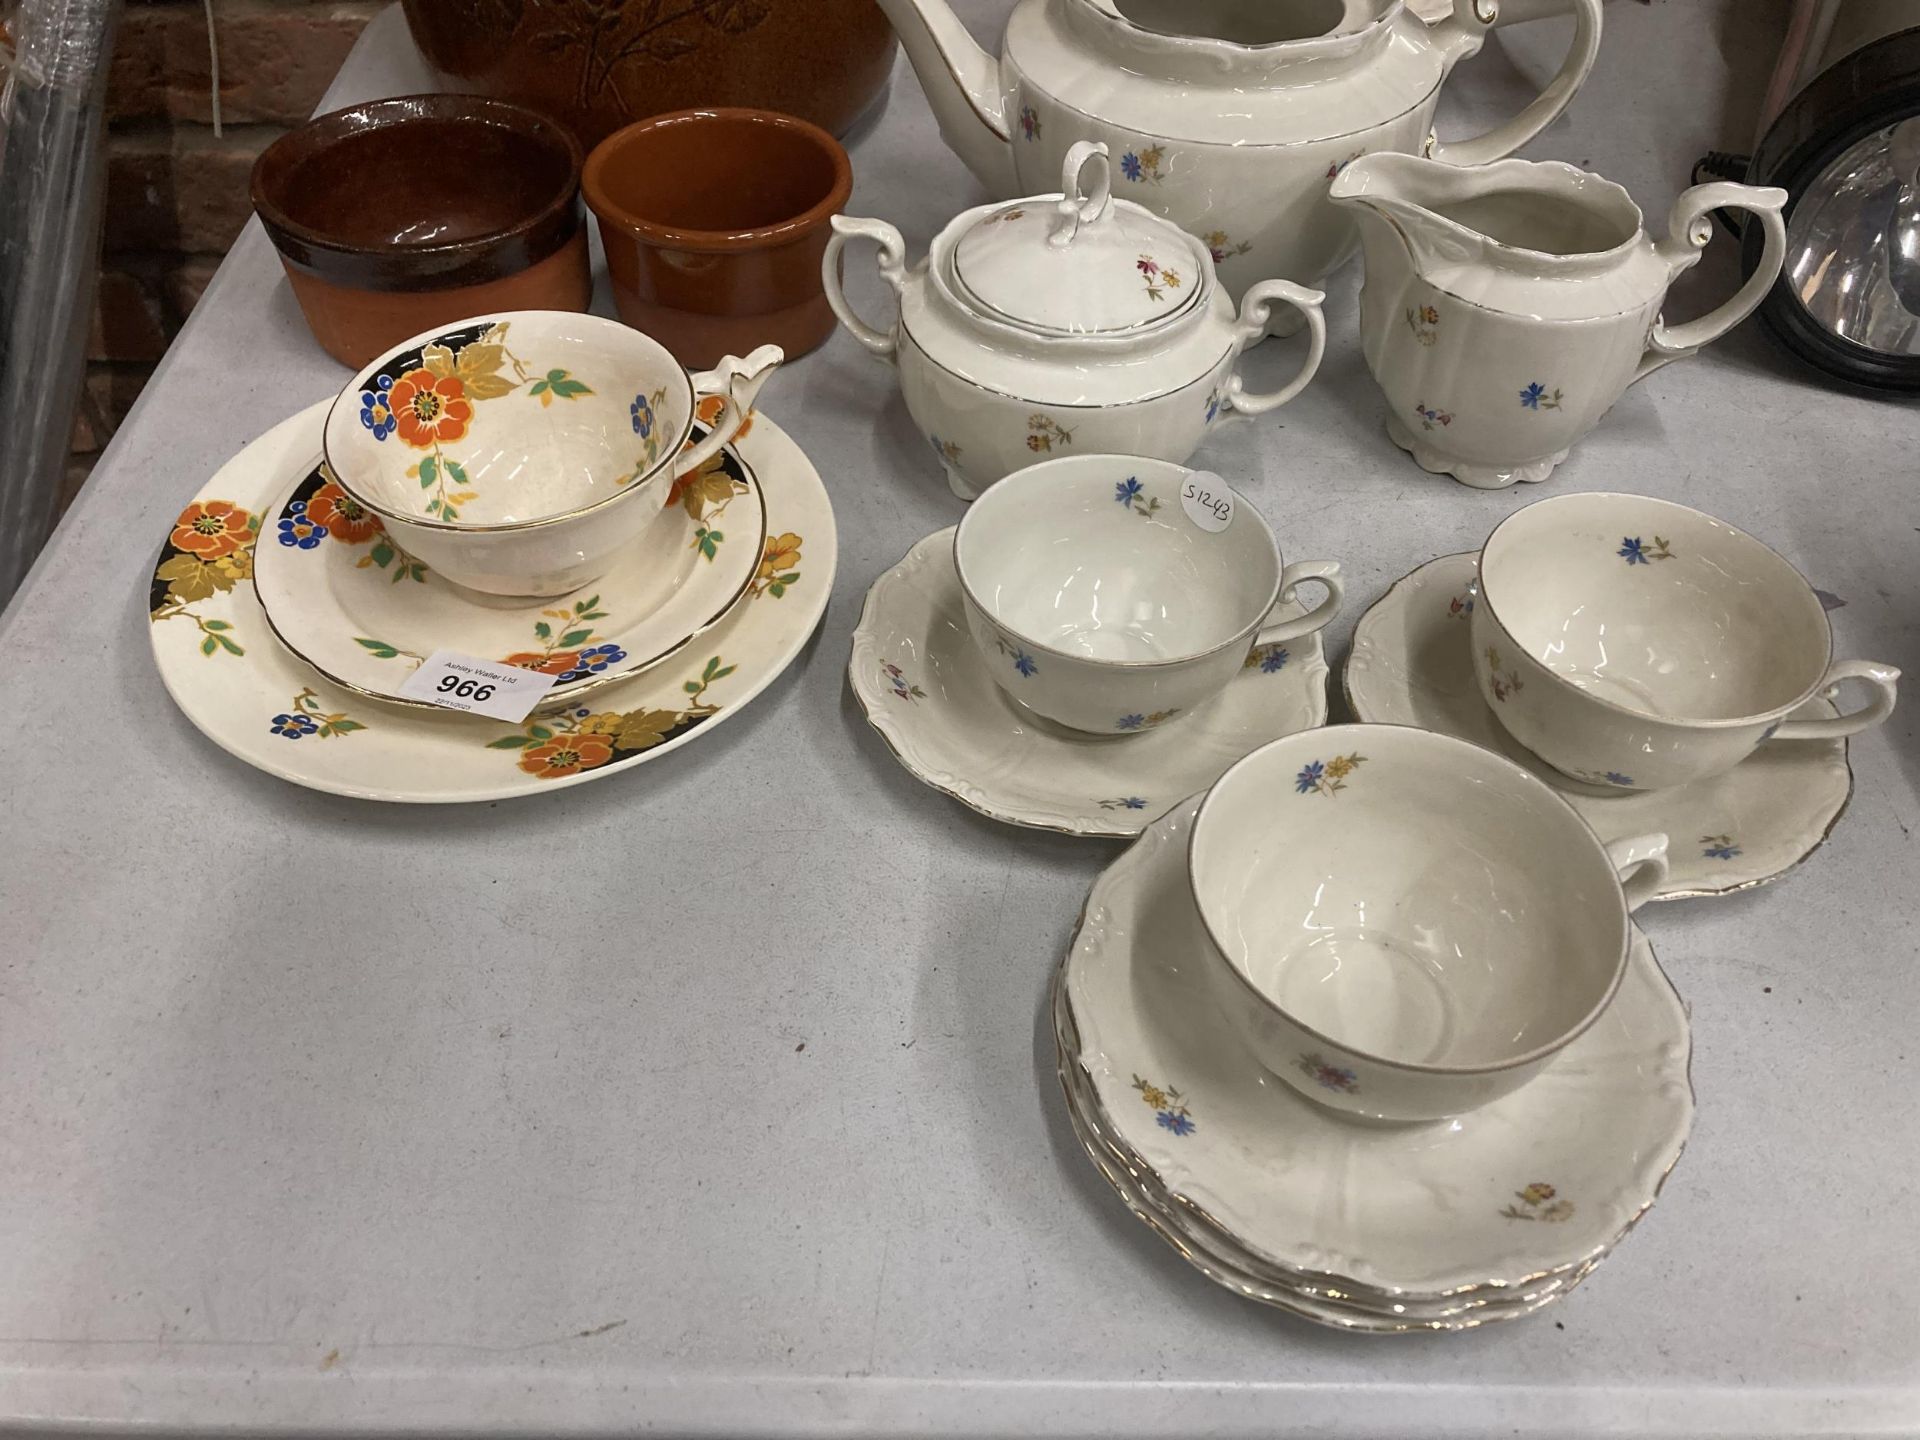 A GERMAN TEASET TO INCLUDE A TEAPOT - NO LID - A CREAM JUG, SUGAR BOWL, CUPS AND SAUCERS, A FLORAL - Image 3 of 3